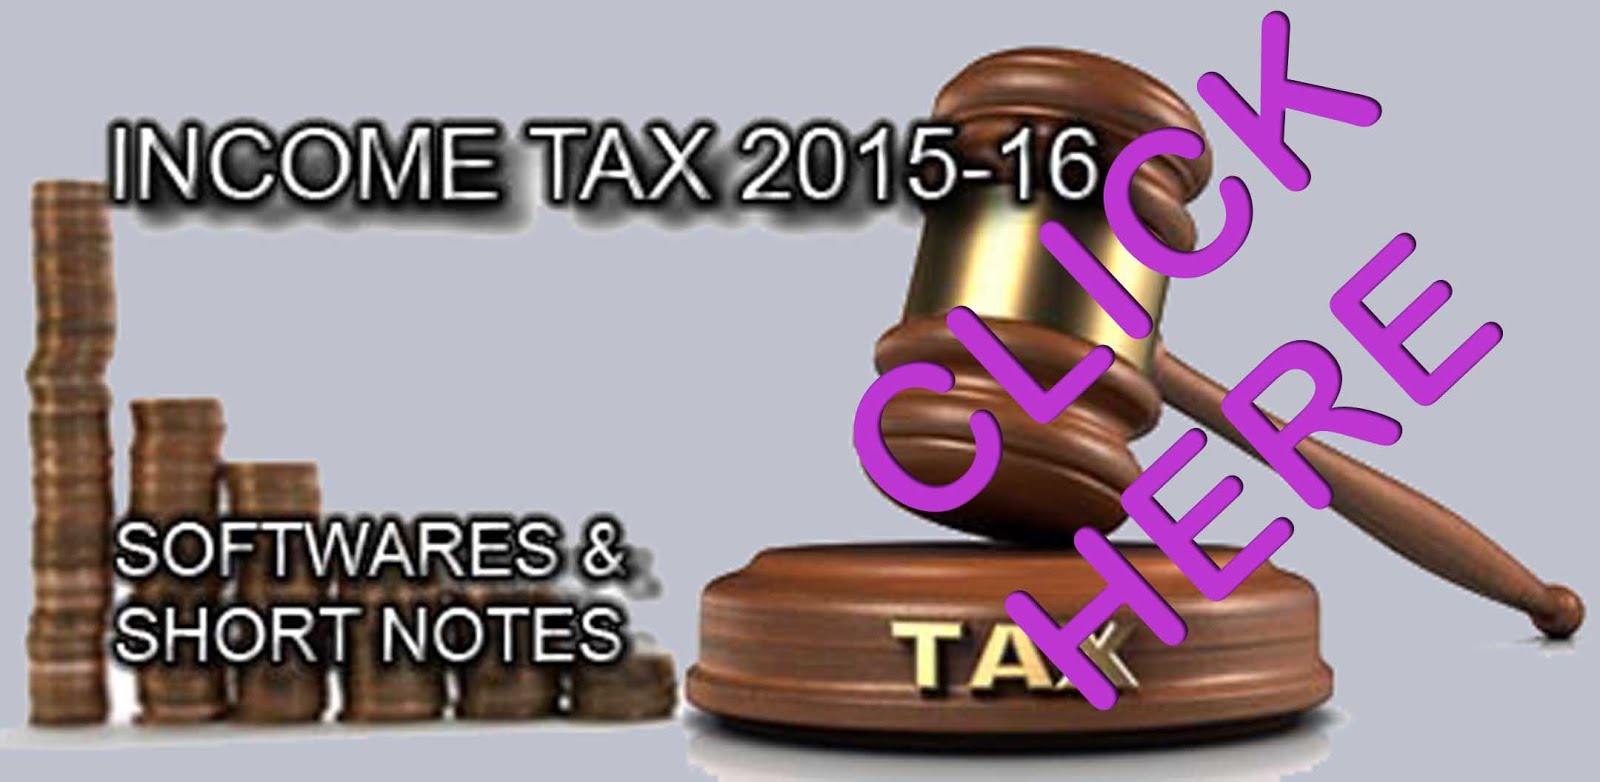 INCOME TAX - SOFTWARES AND SHORT NOTES FROM ALRAHIMAN